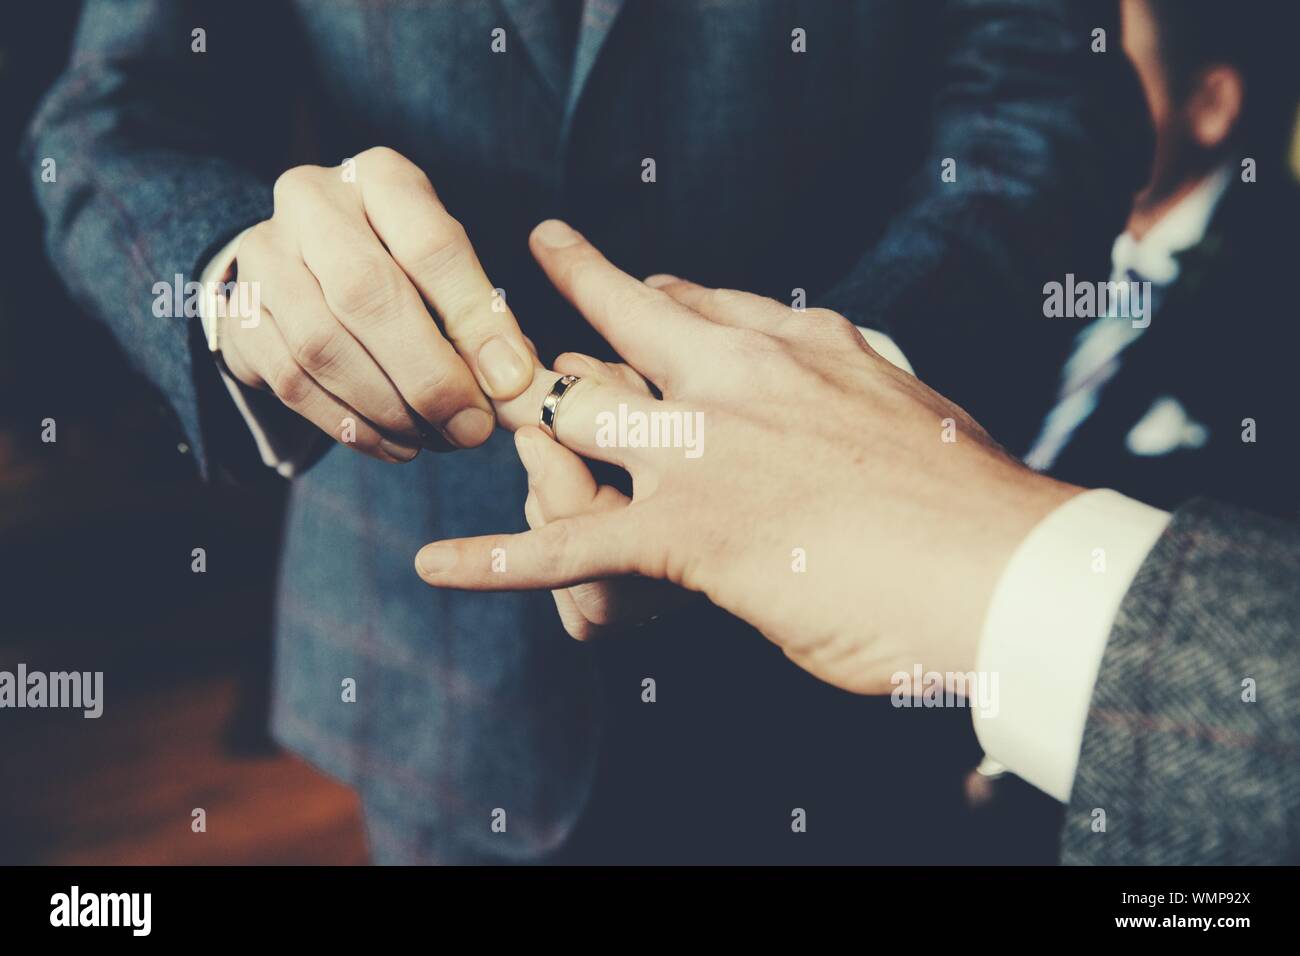 Gay Men Exchanging Rings At Wedding Ceremony Stock Photo